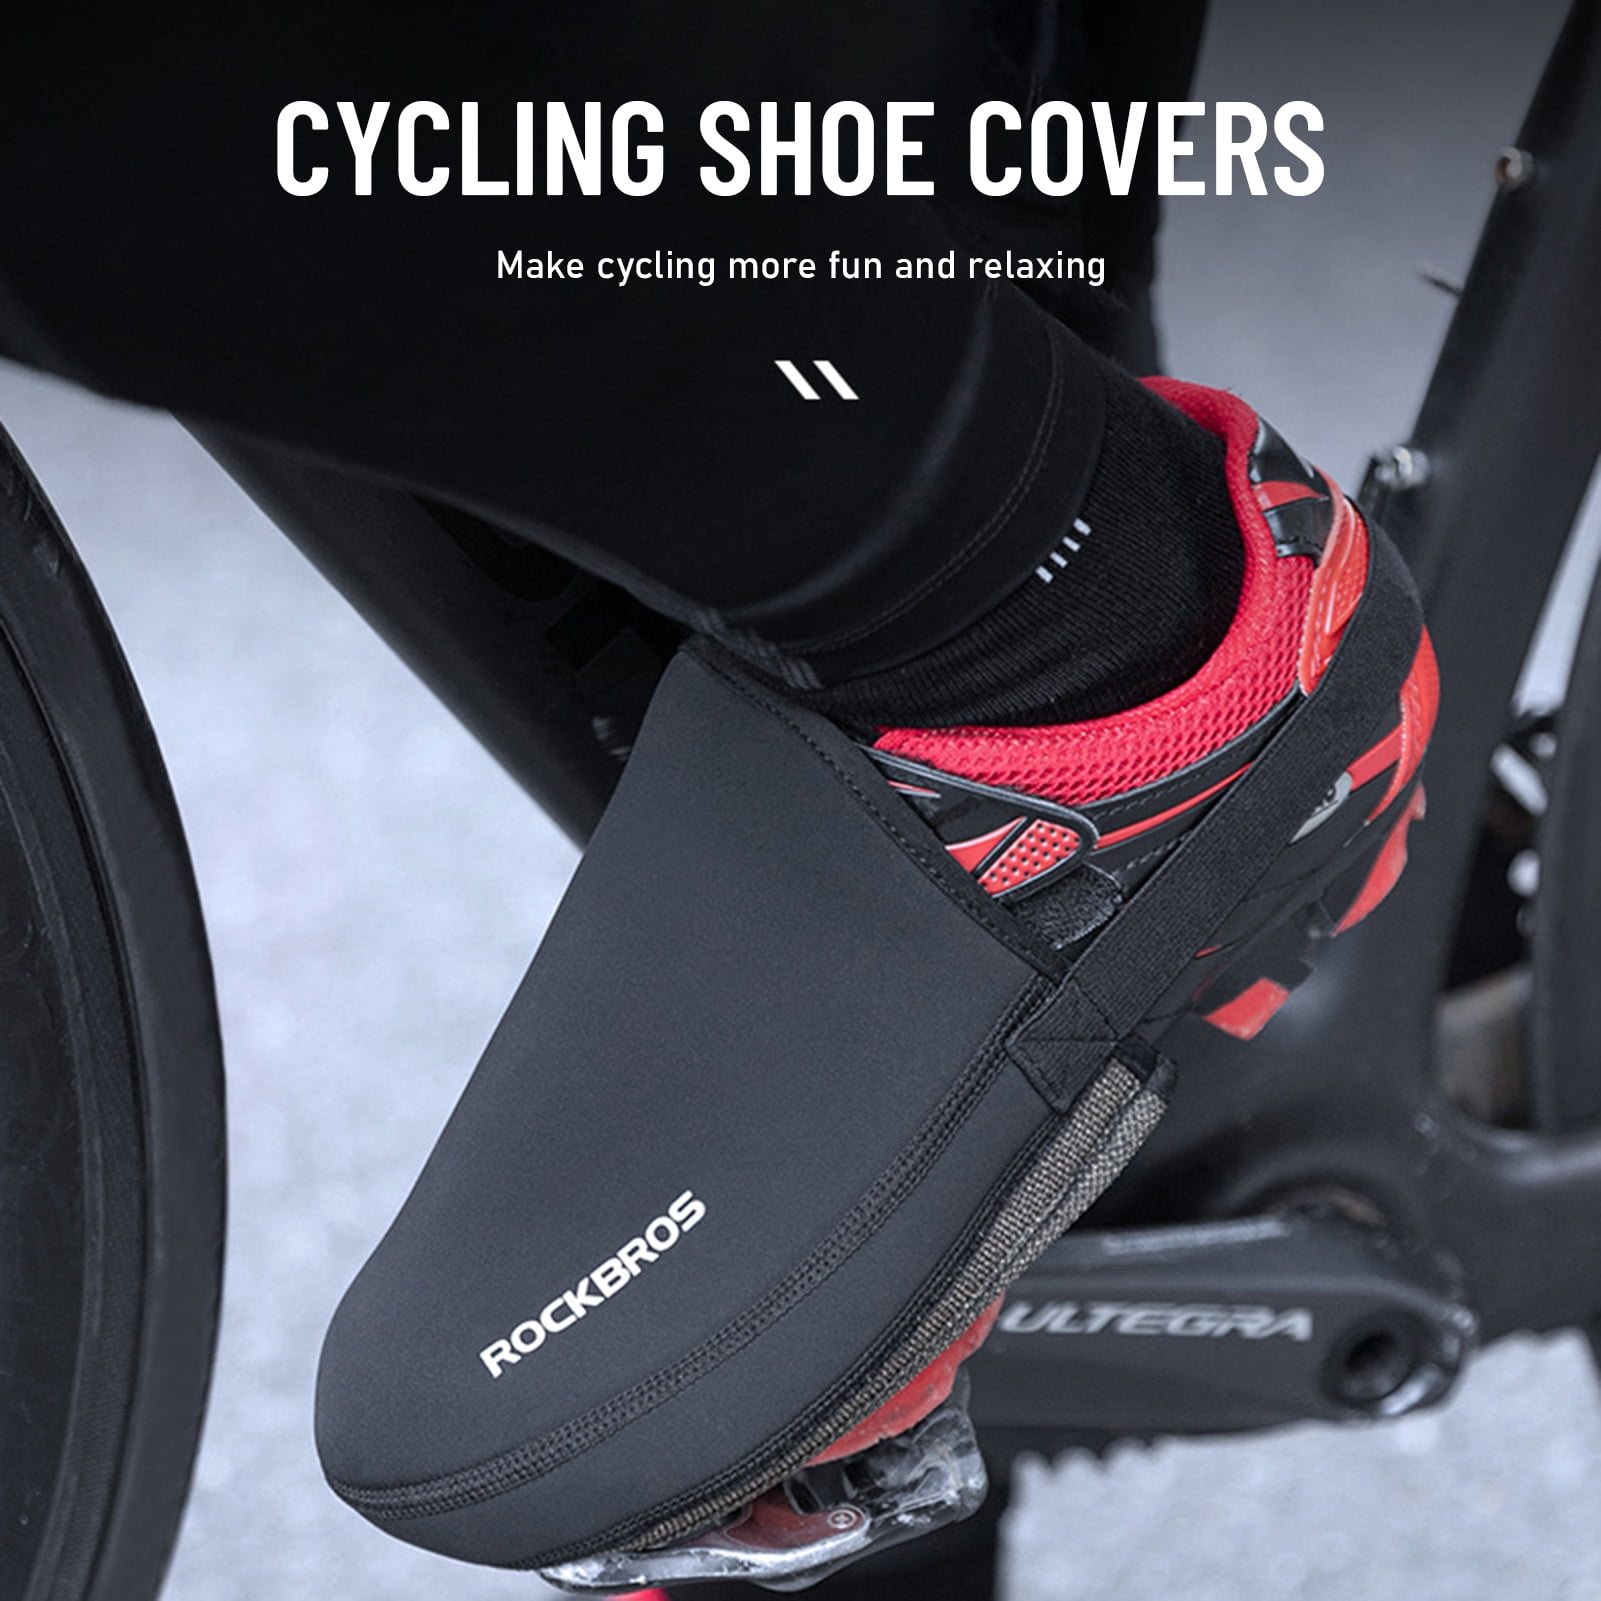 Bicycle Cycling Shoe Covers Toe Cover Protector Windproof Warm Half Overshoes 